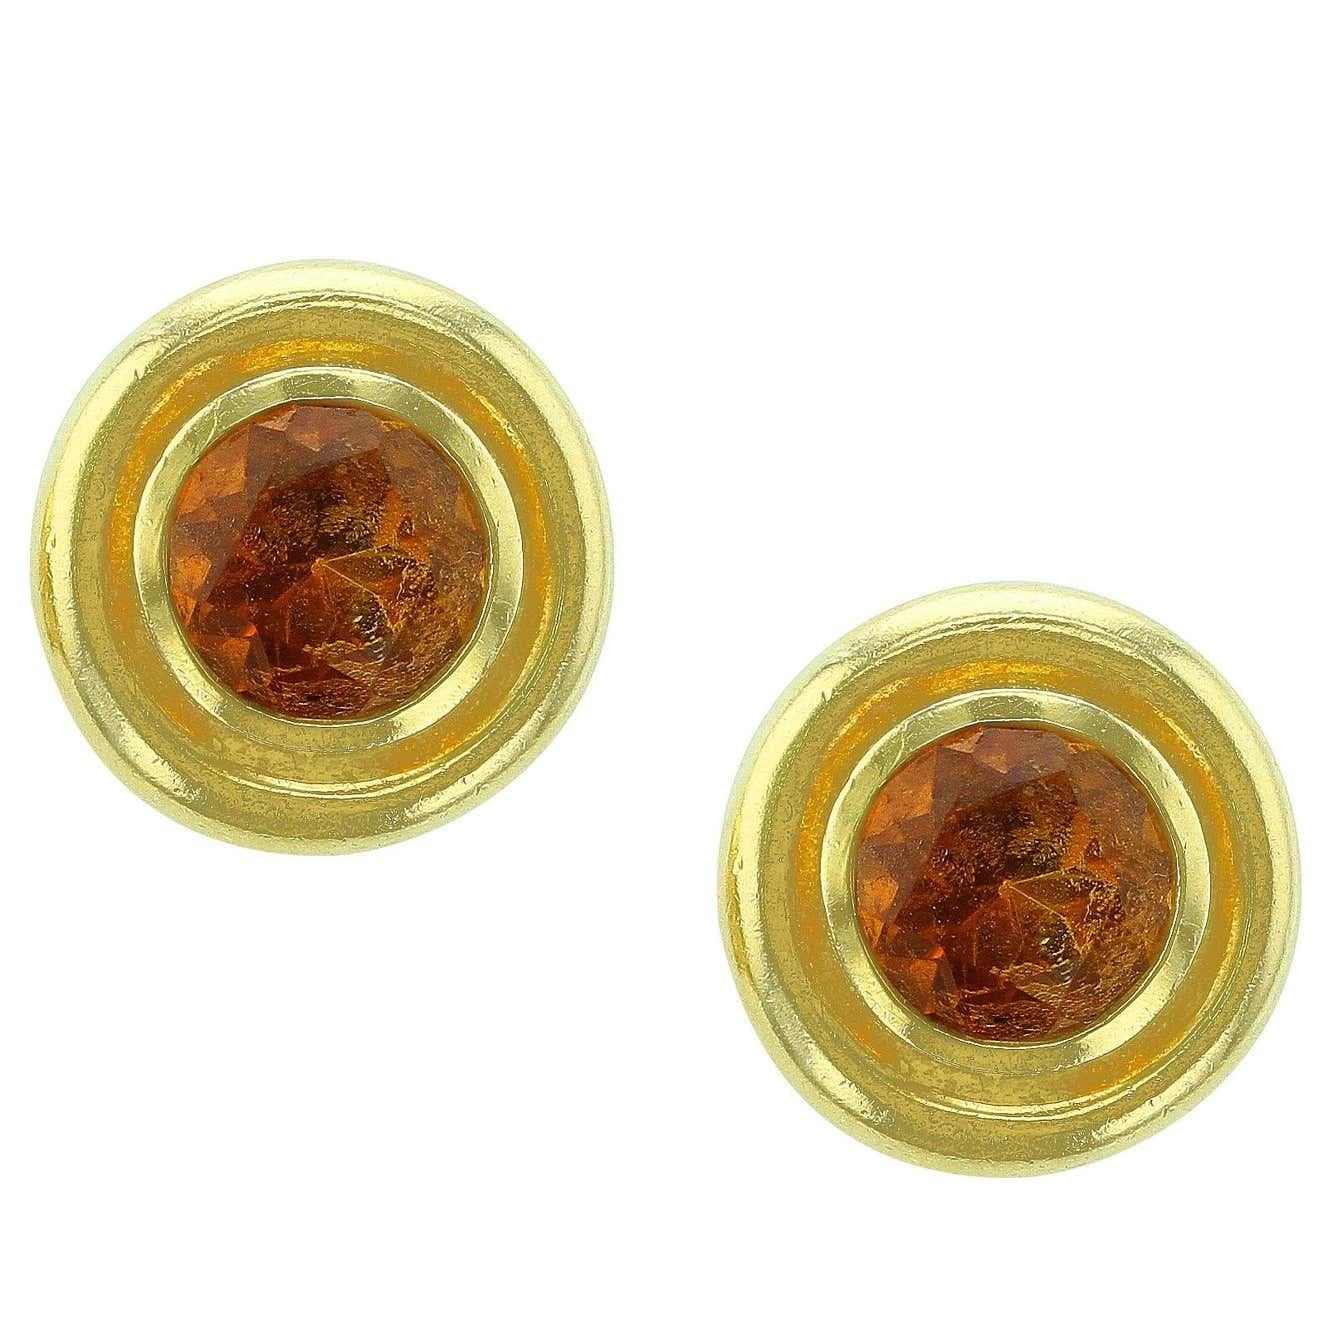 A simple and elegant pair of round citrine earrings in 18K Yellow Gold. Signed 